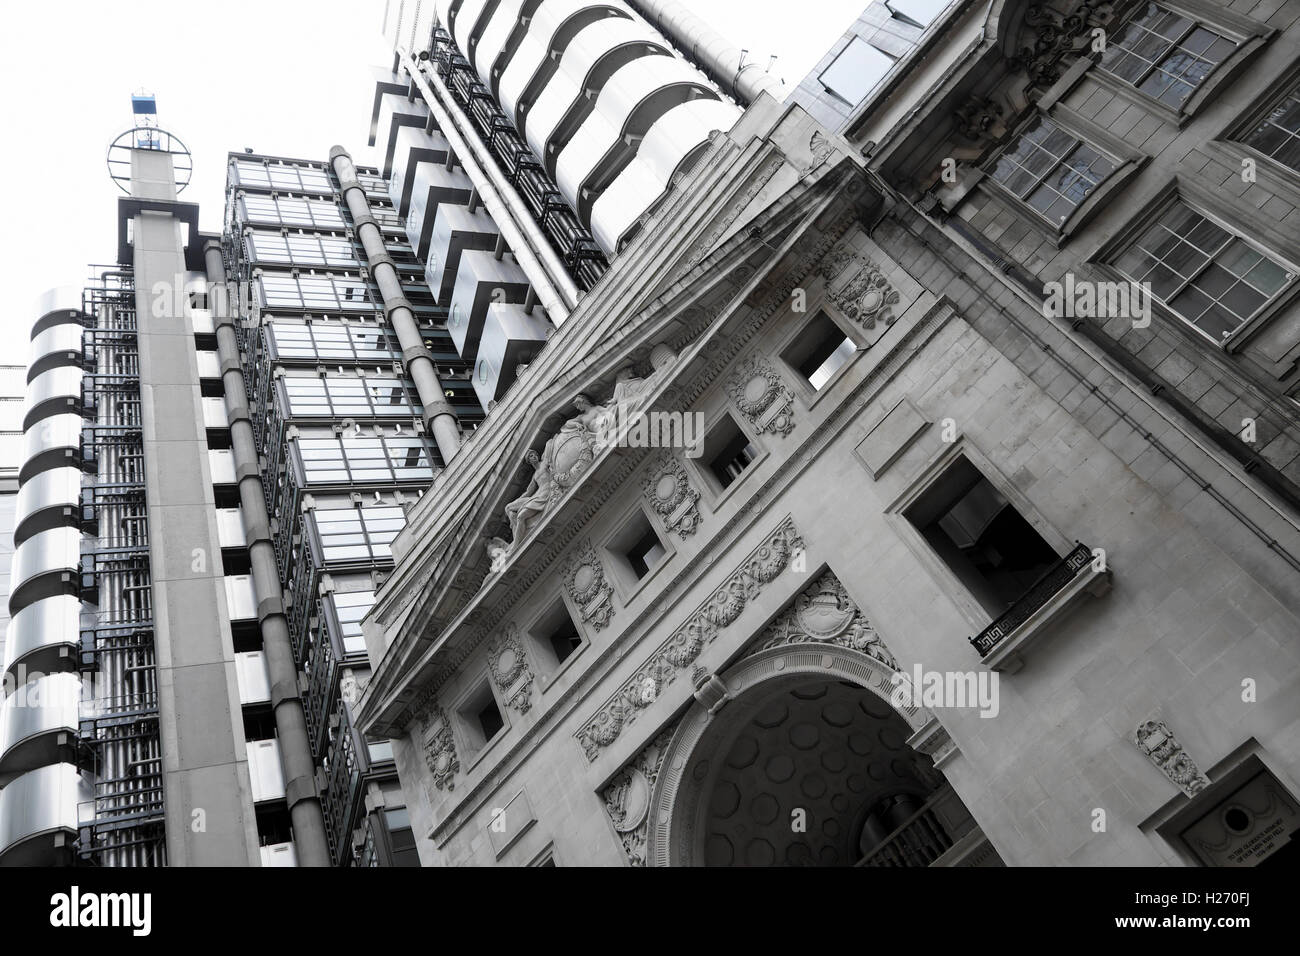 Old and new architecture Lloyds Building in the City of London, UK  KATHY DEWITT Stock Photo